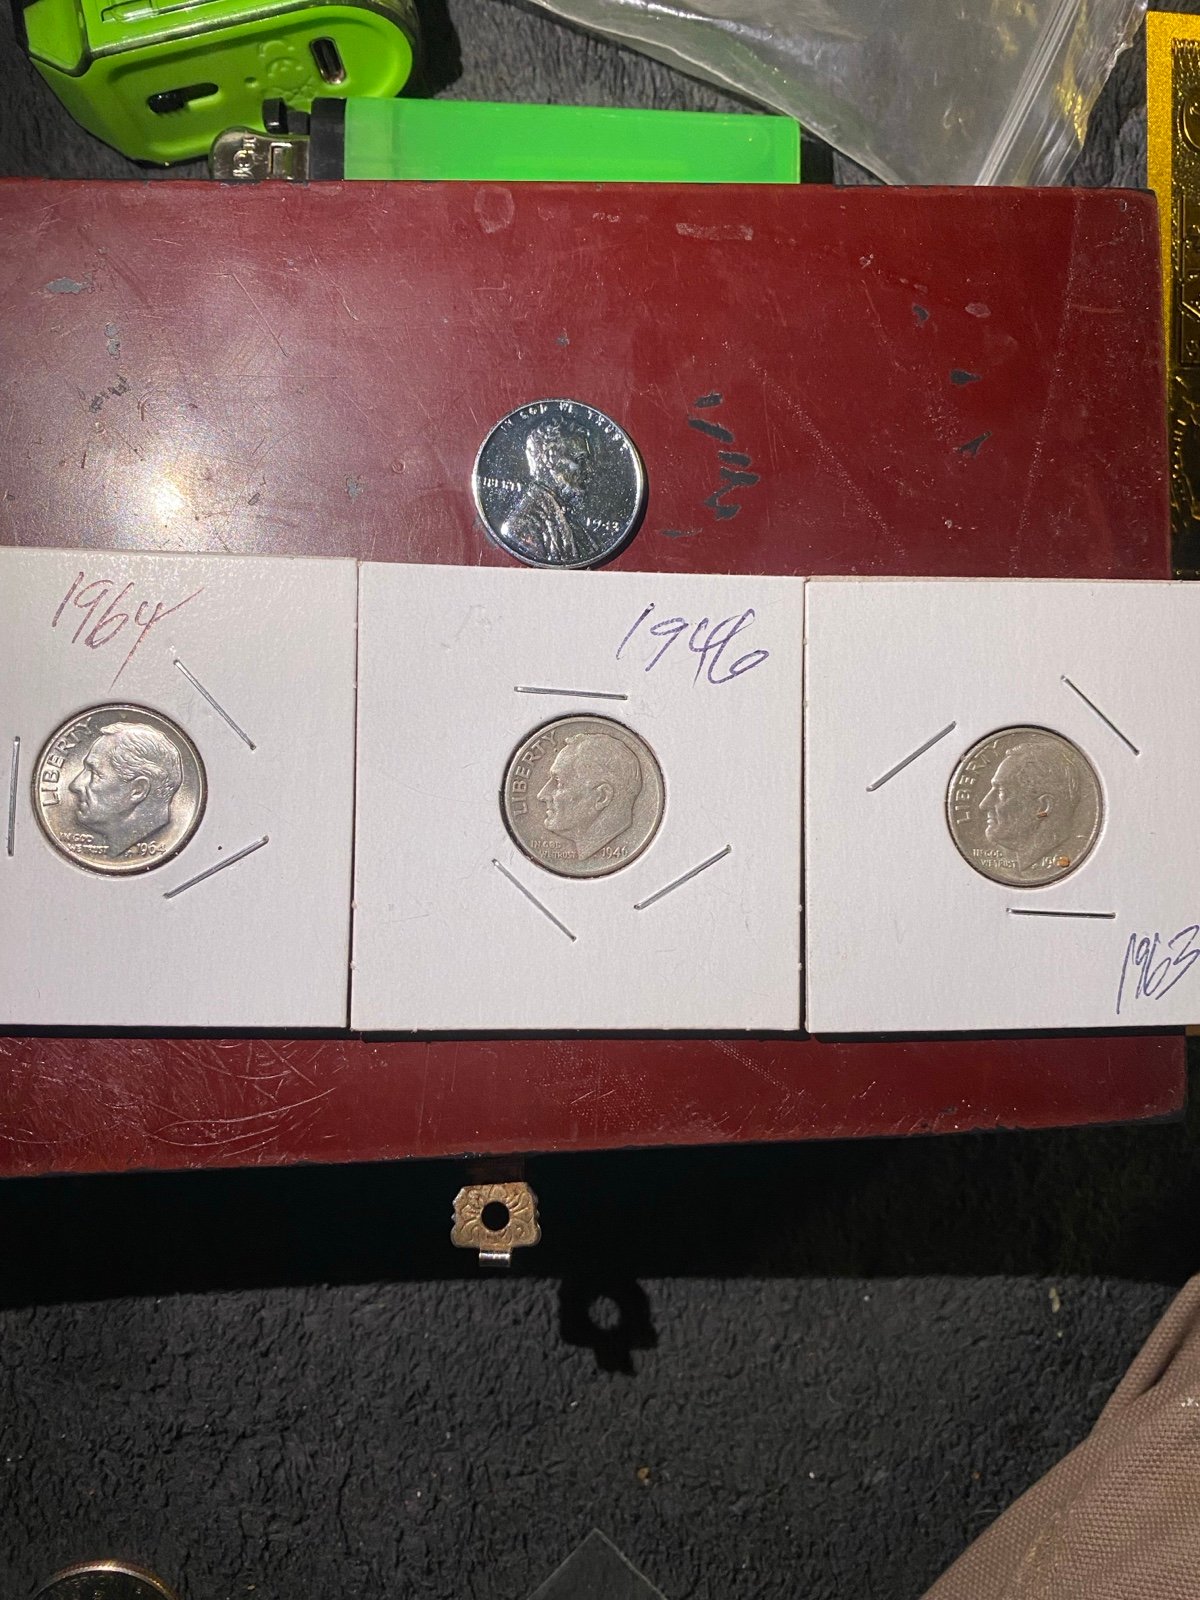 Three Roosevelt, Silver dimes, 1963, 1946 and 1964, and one still penny, 1943 FHWx540GU